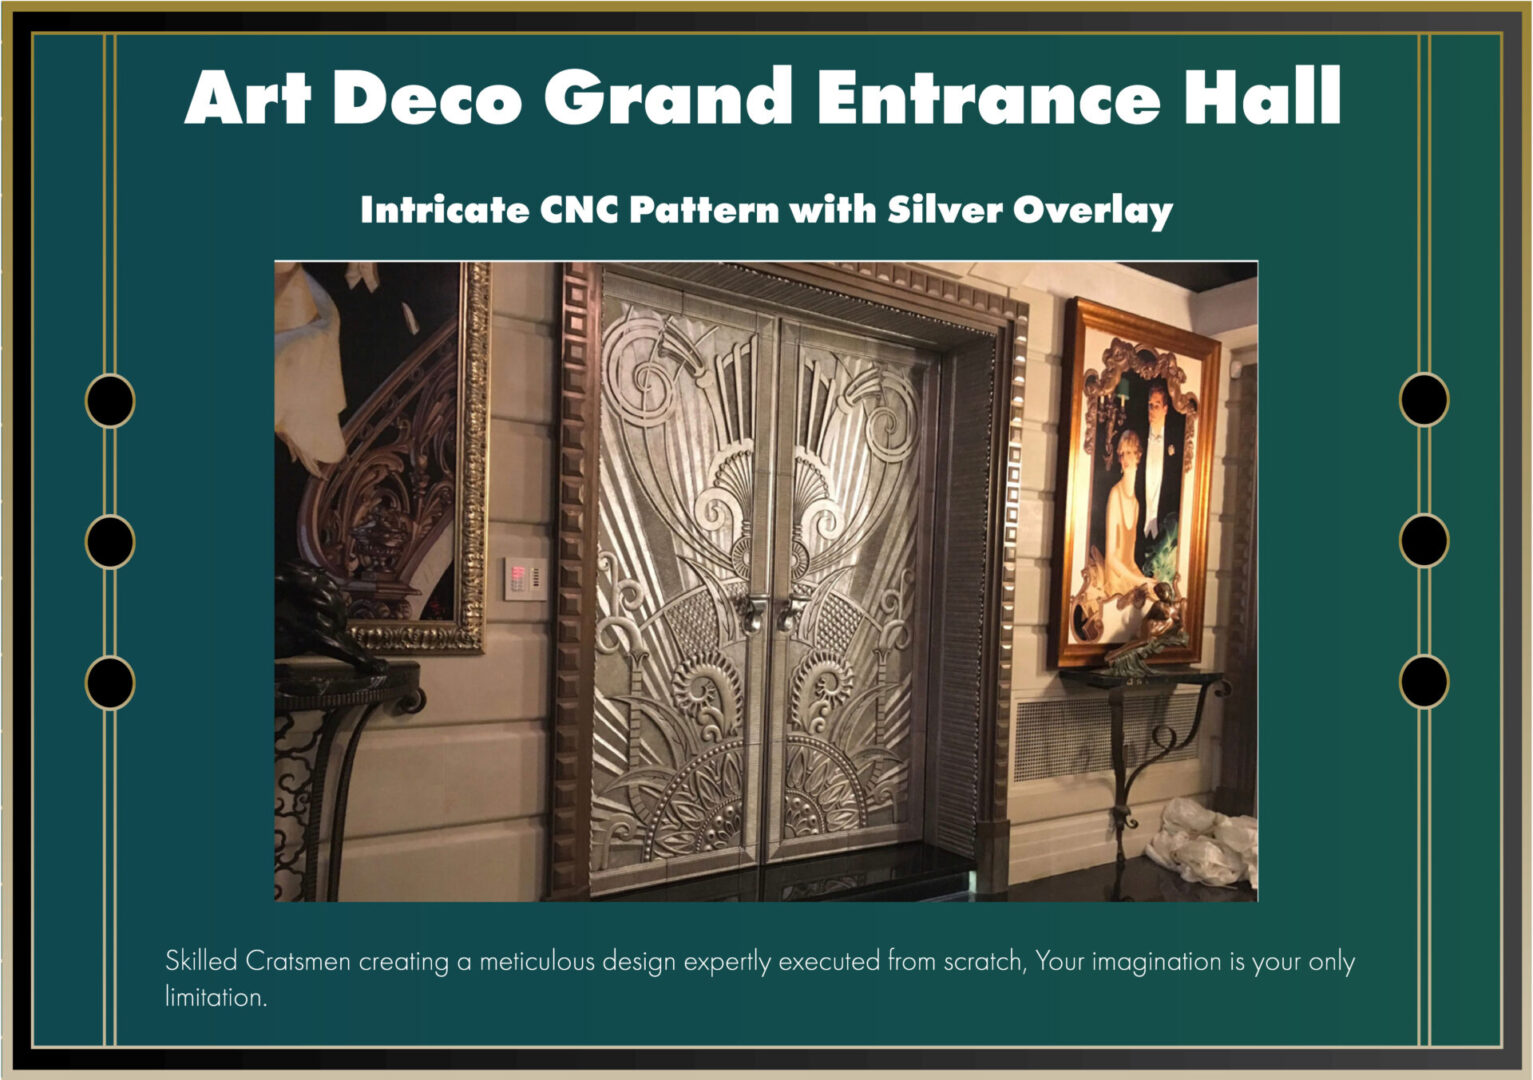 Art Deco Grand Entrance Hall with Intricate CNC Pattern